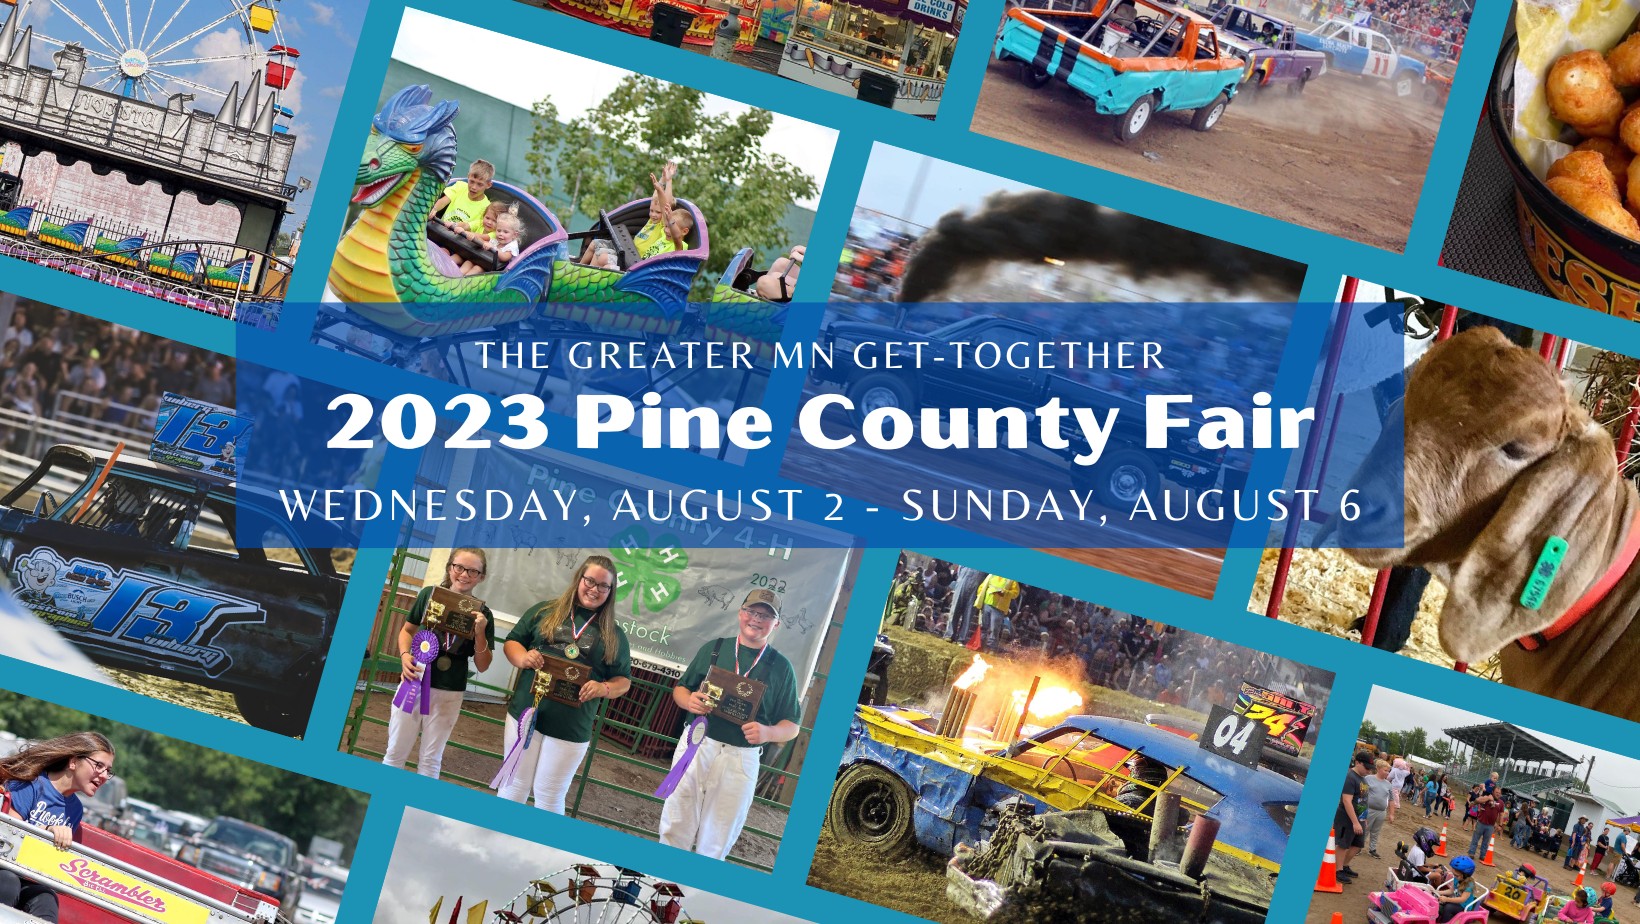 Pine County Fair 2023 Pine City Area Chamber of Commerce